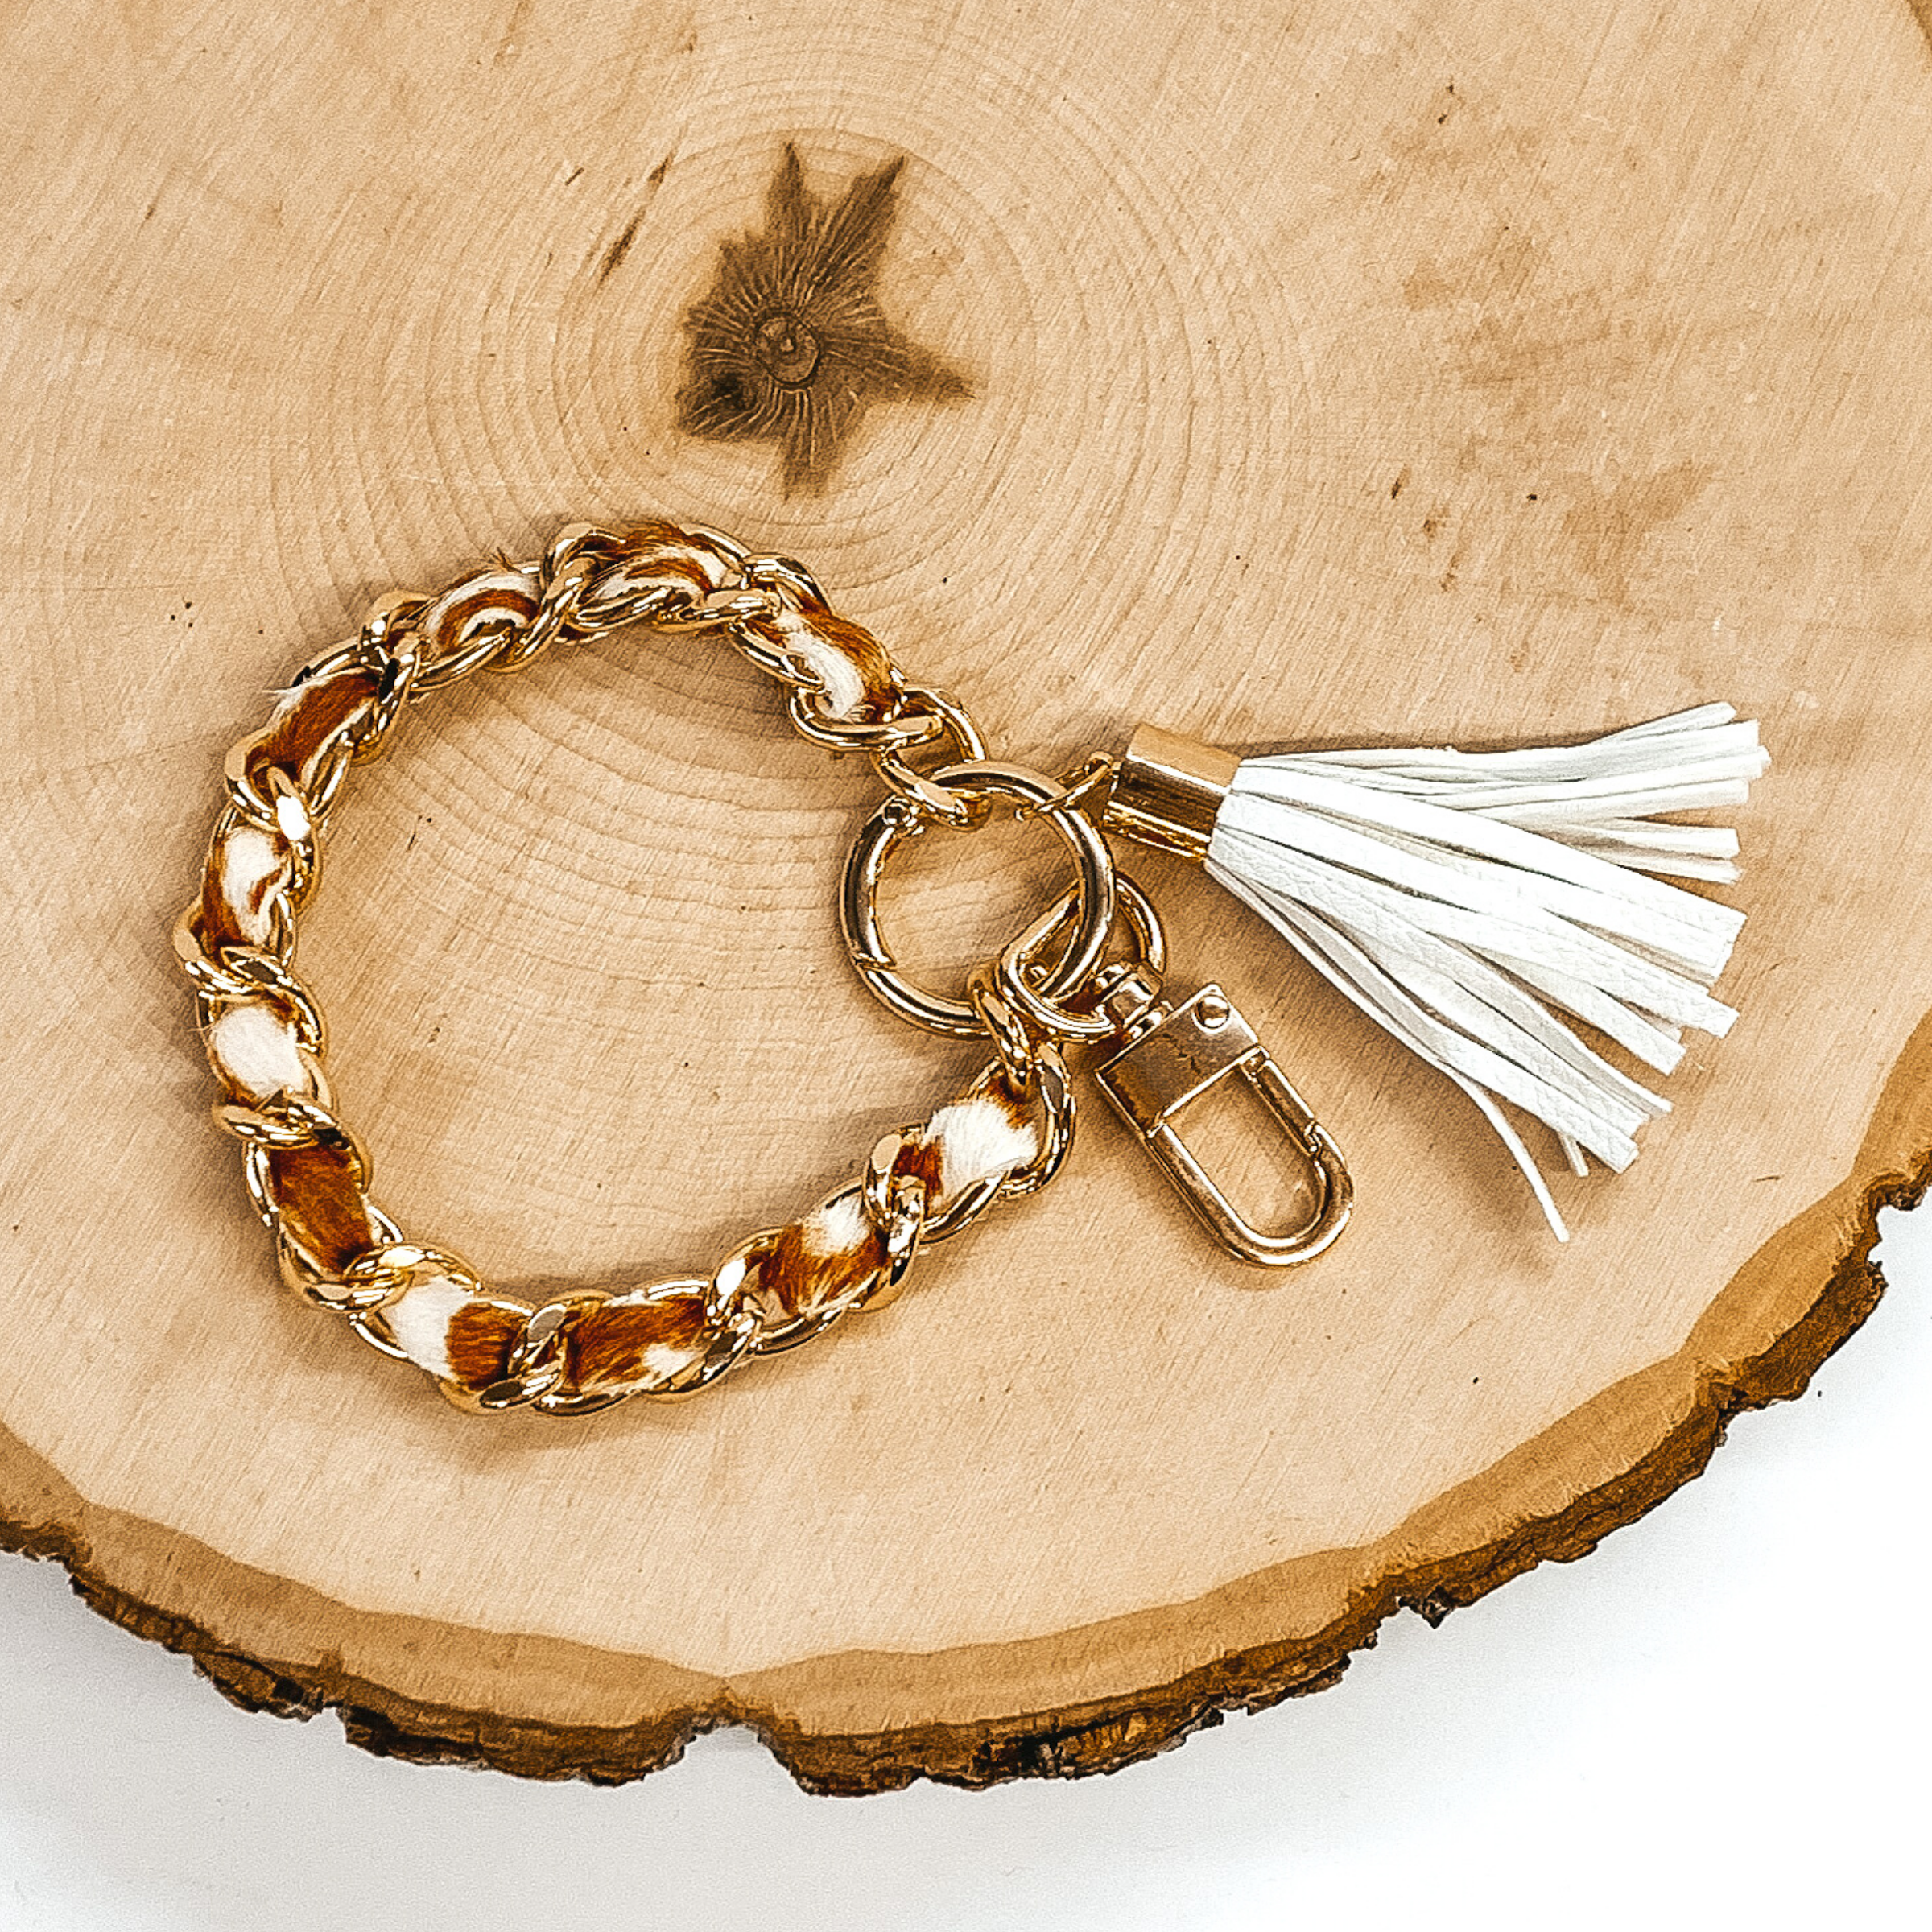 Gold chain link bangle with a cowhide like material running through the link. The material is a brown and white color. This bangle has two key chains and a white tassel. It is pictured on a piece of wood on a white background. 